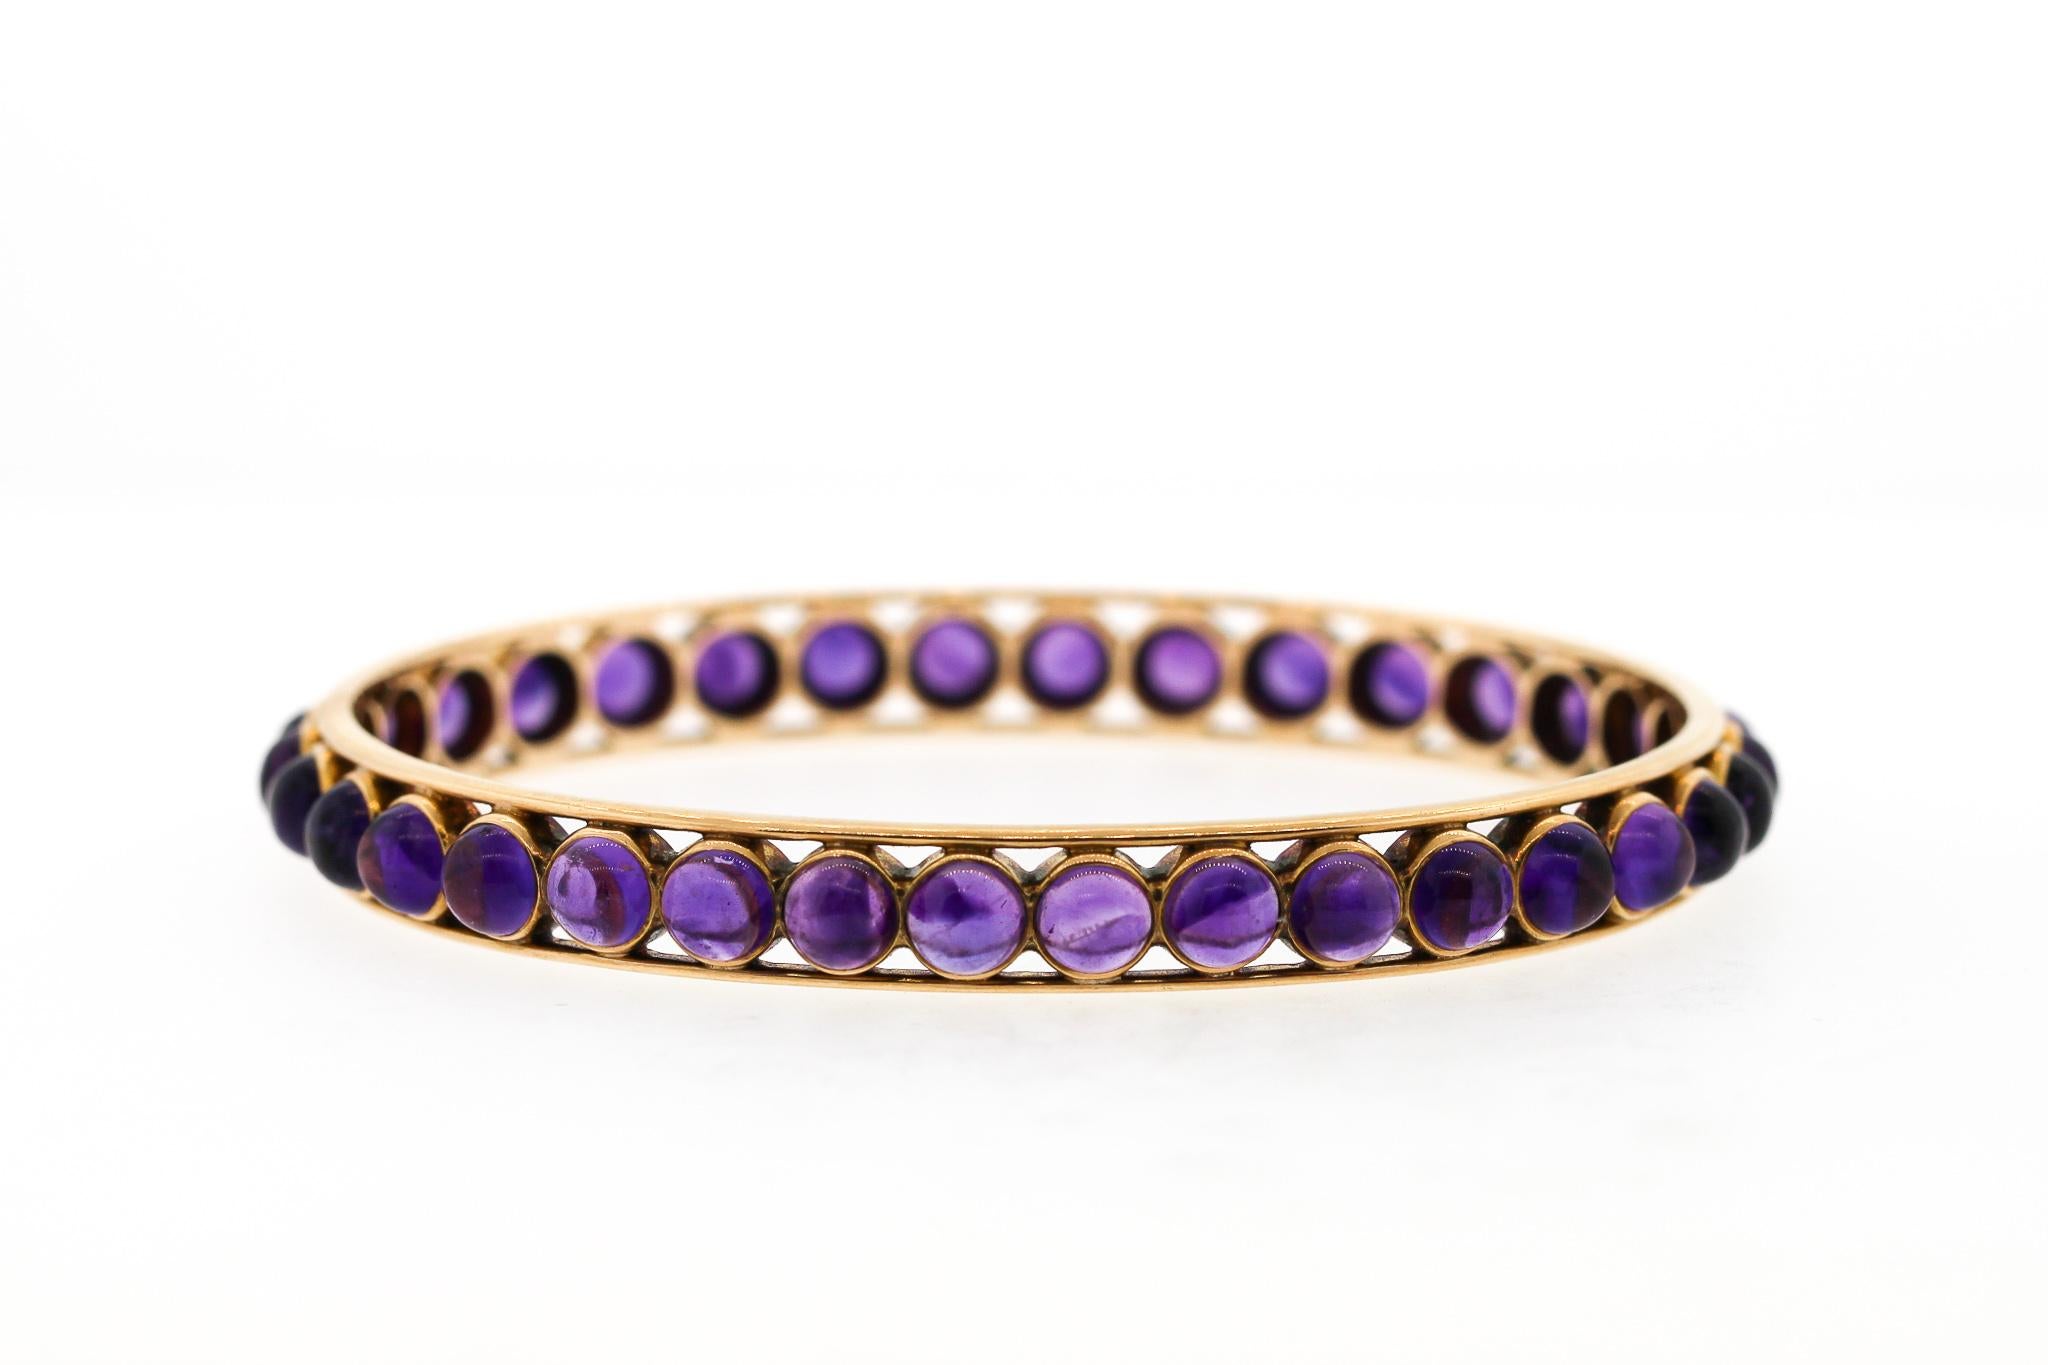 Unusual and easy to wear, this antique Victorian gold bangle set with cabochon amethysts is attractive and versatile. The concentric amethysts set all the way around the oval bangle is unusual with such a modern aesthetic. The bracelet is very easy